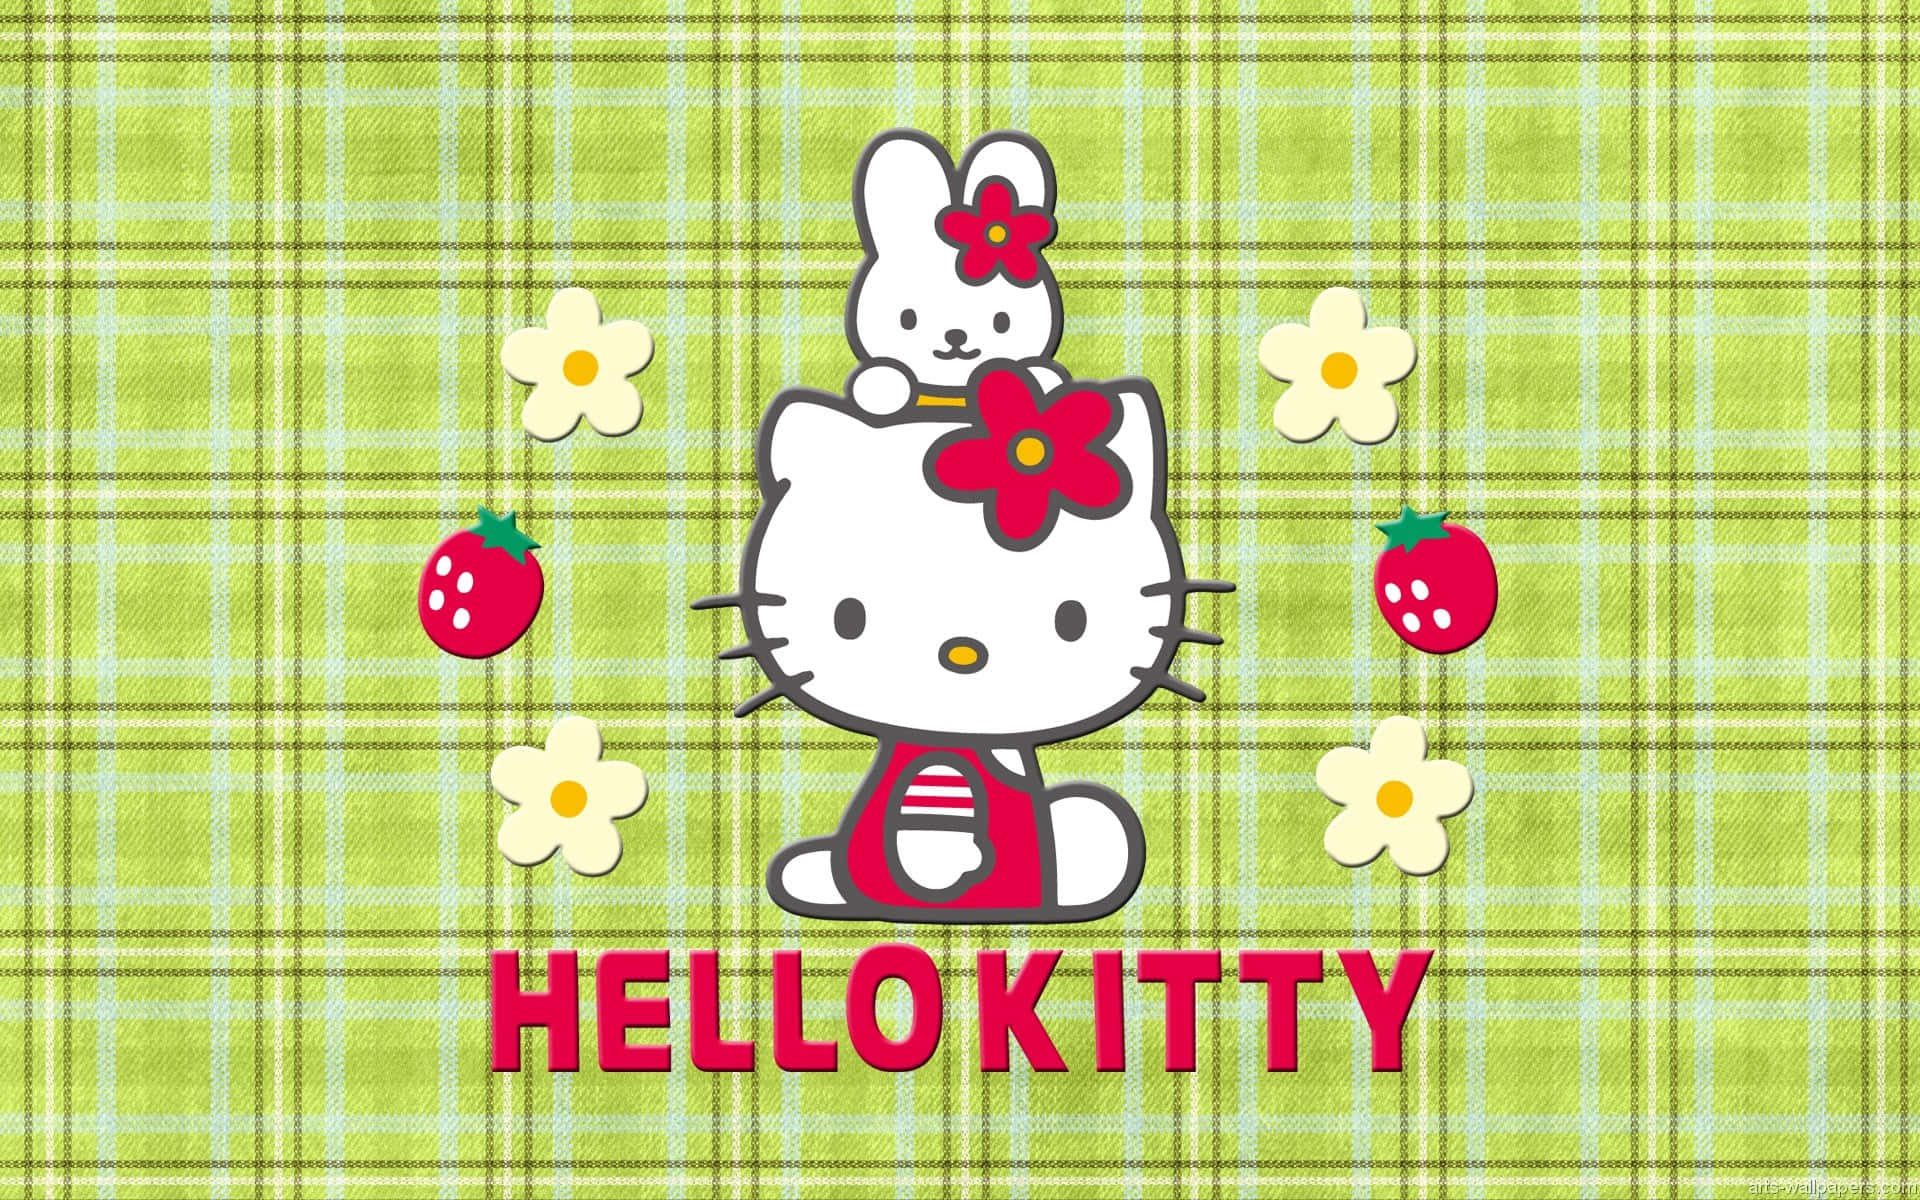 Switch up your work space with this fun Hello Kitty PC Wallpaper